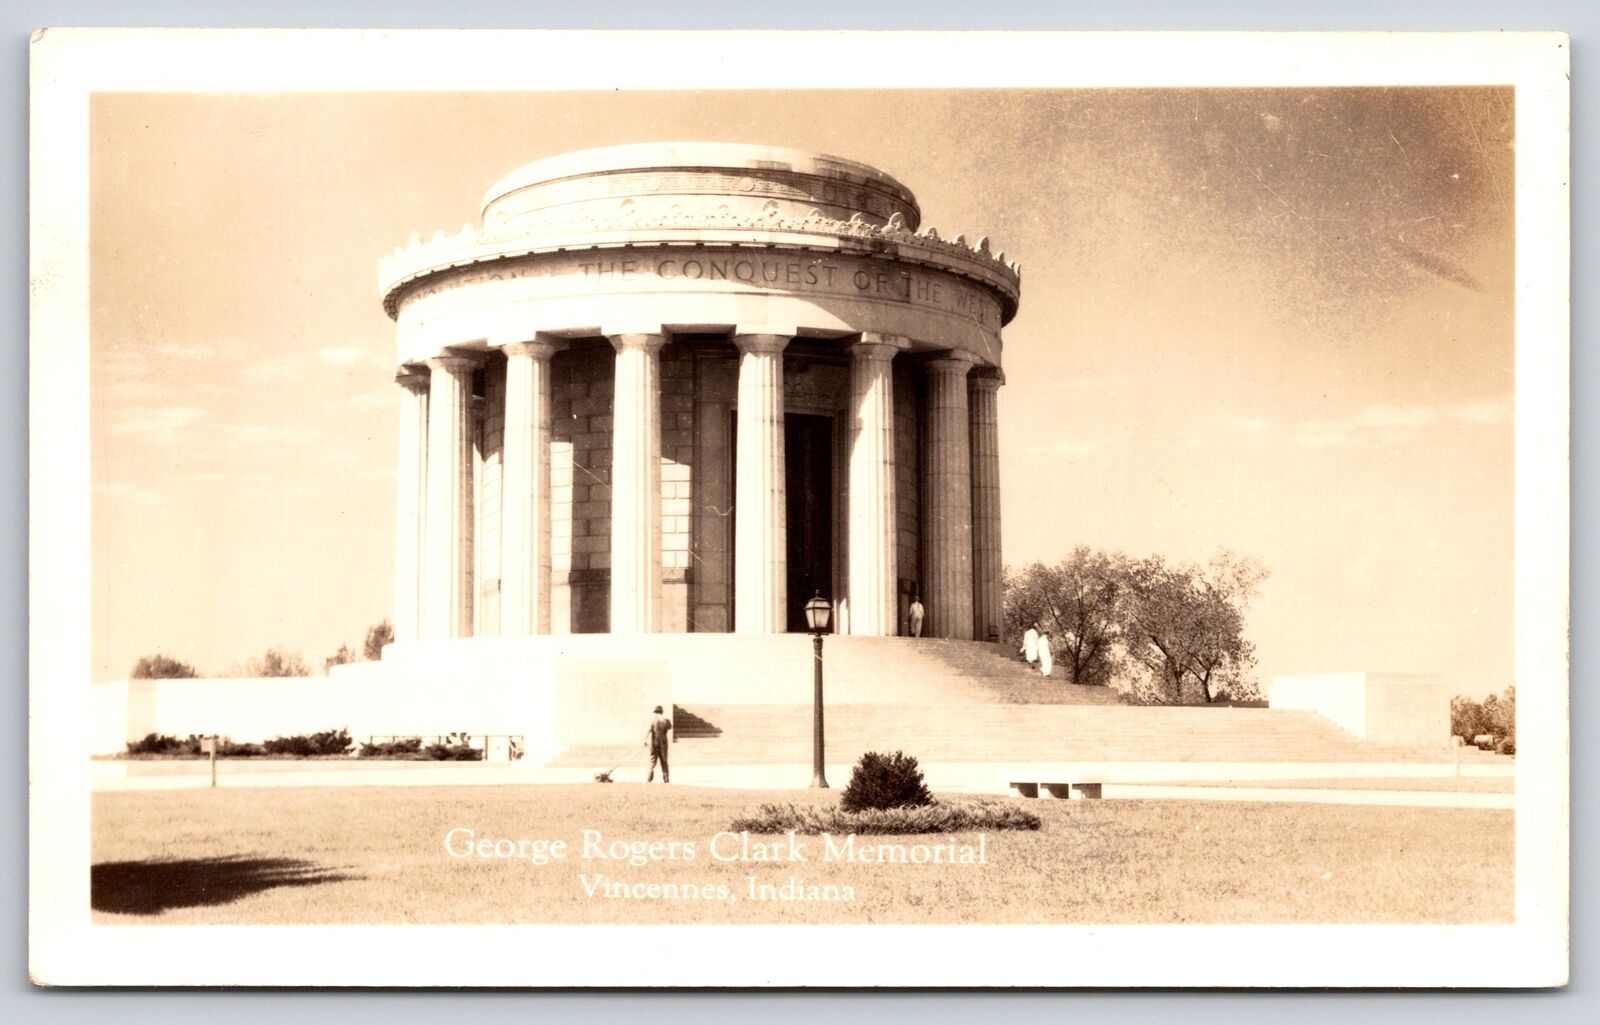 Real Photo Postcard~George Rogers Clark Memorial Vincennes Indiana~RPPC